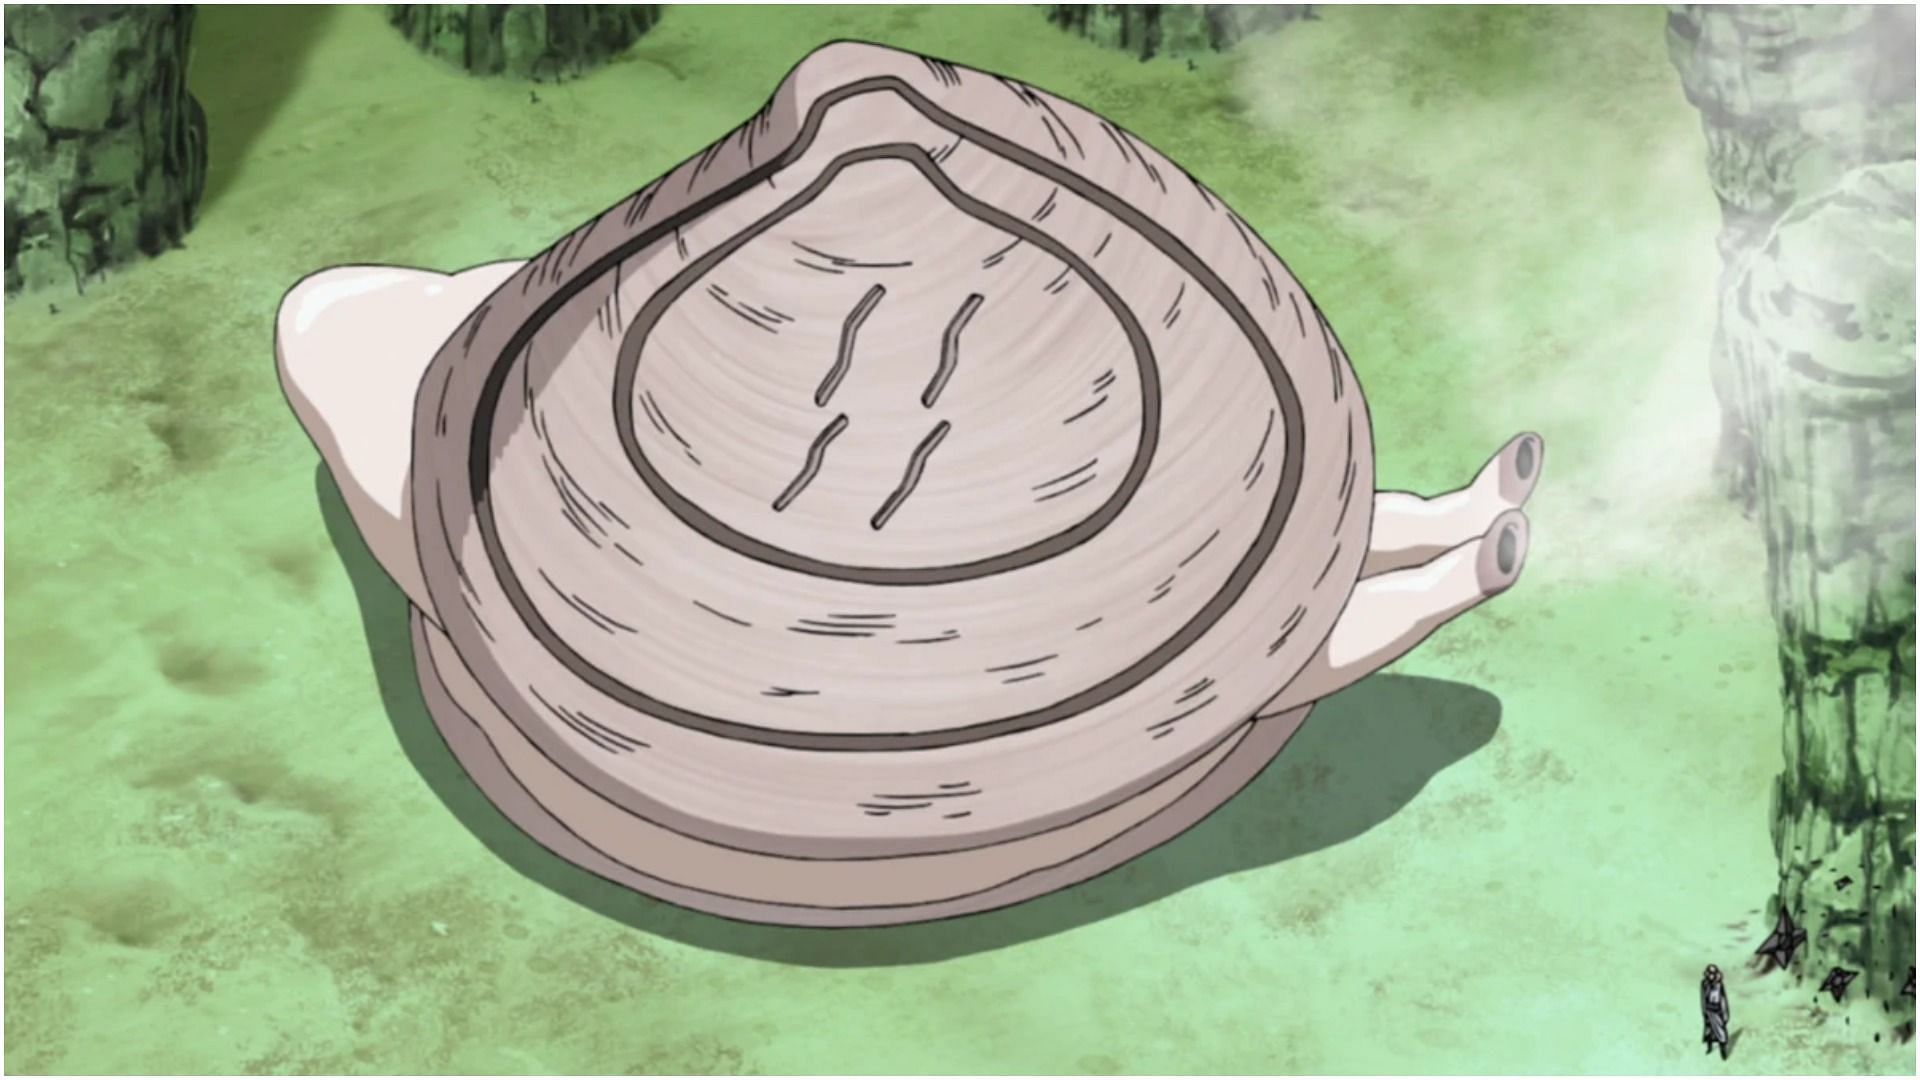 Giant Clam as seen in the anime (Image via Studio Pierrot)